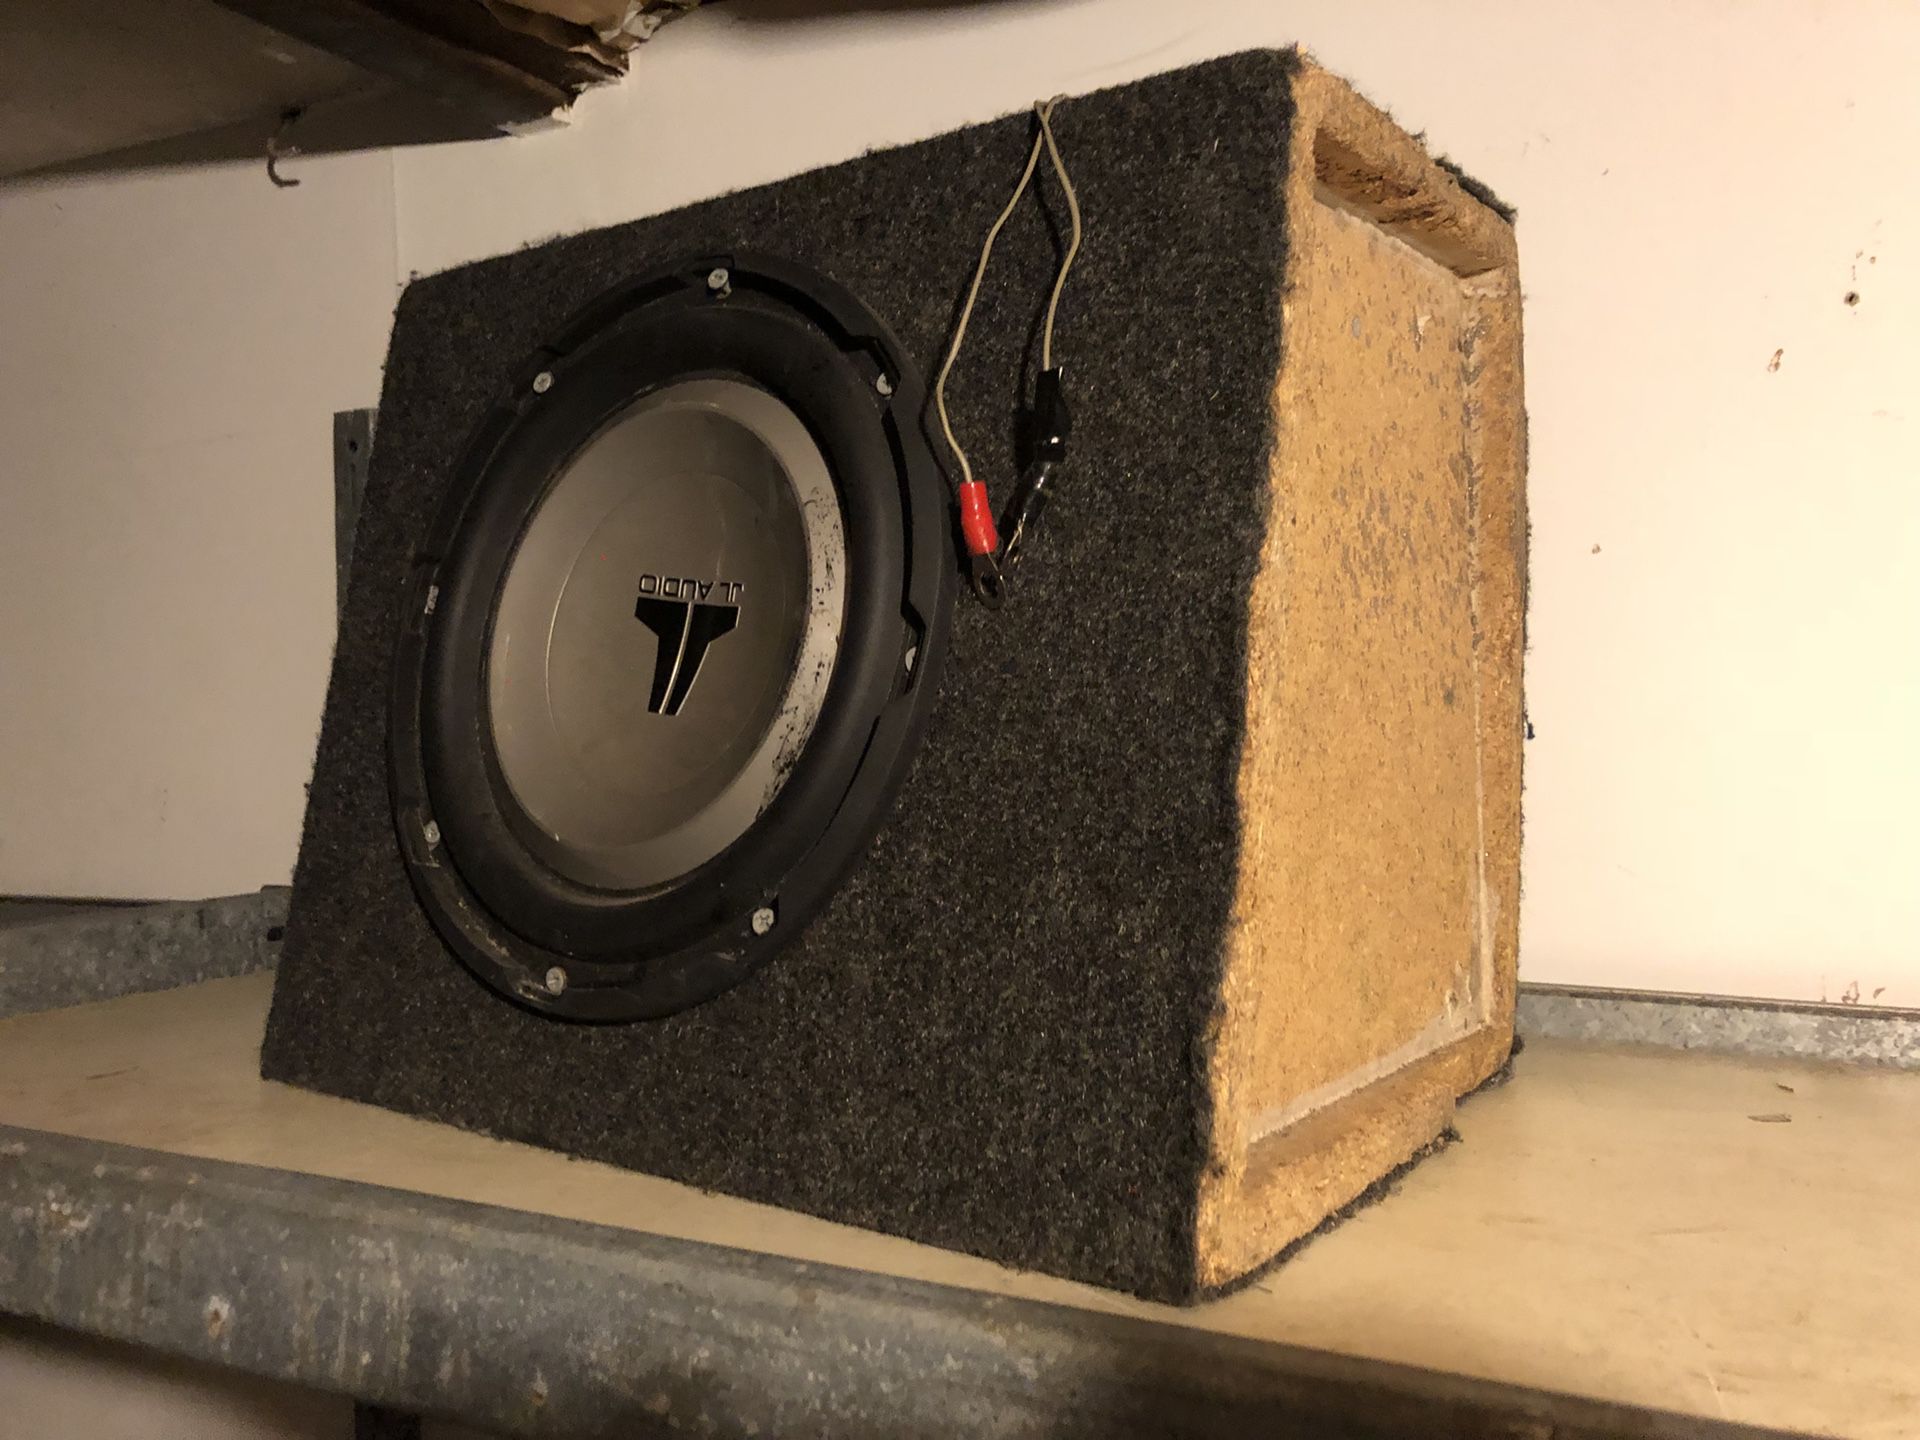 JL 12” Subwoofer in Compact Wooden Box